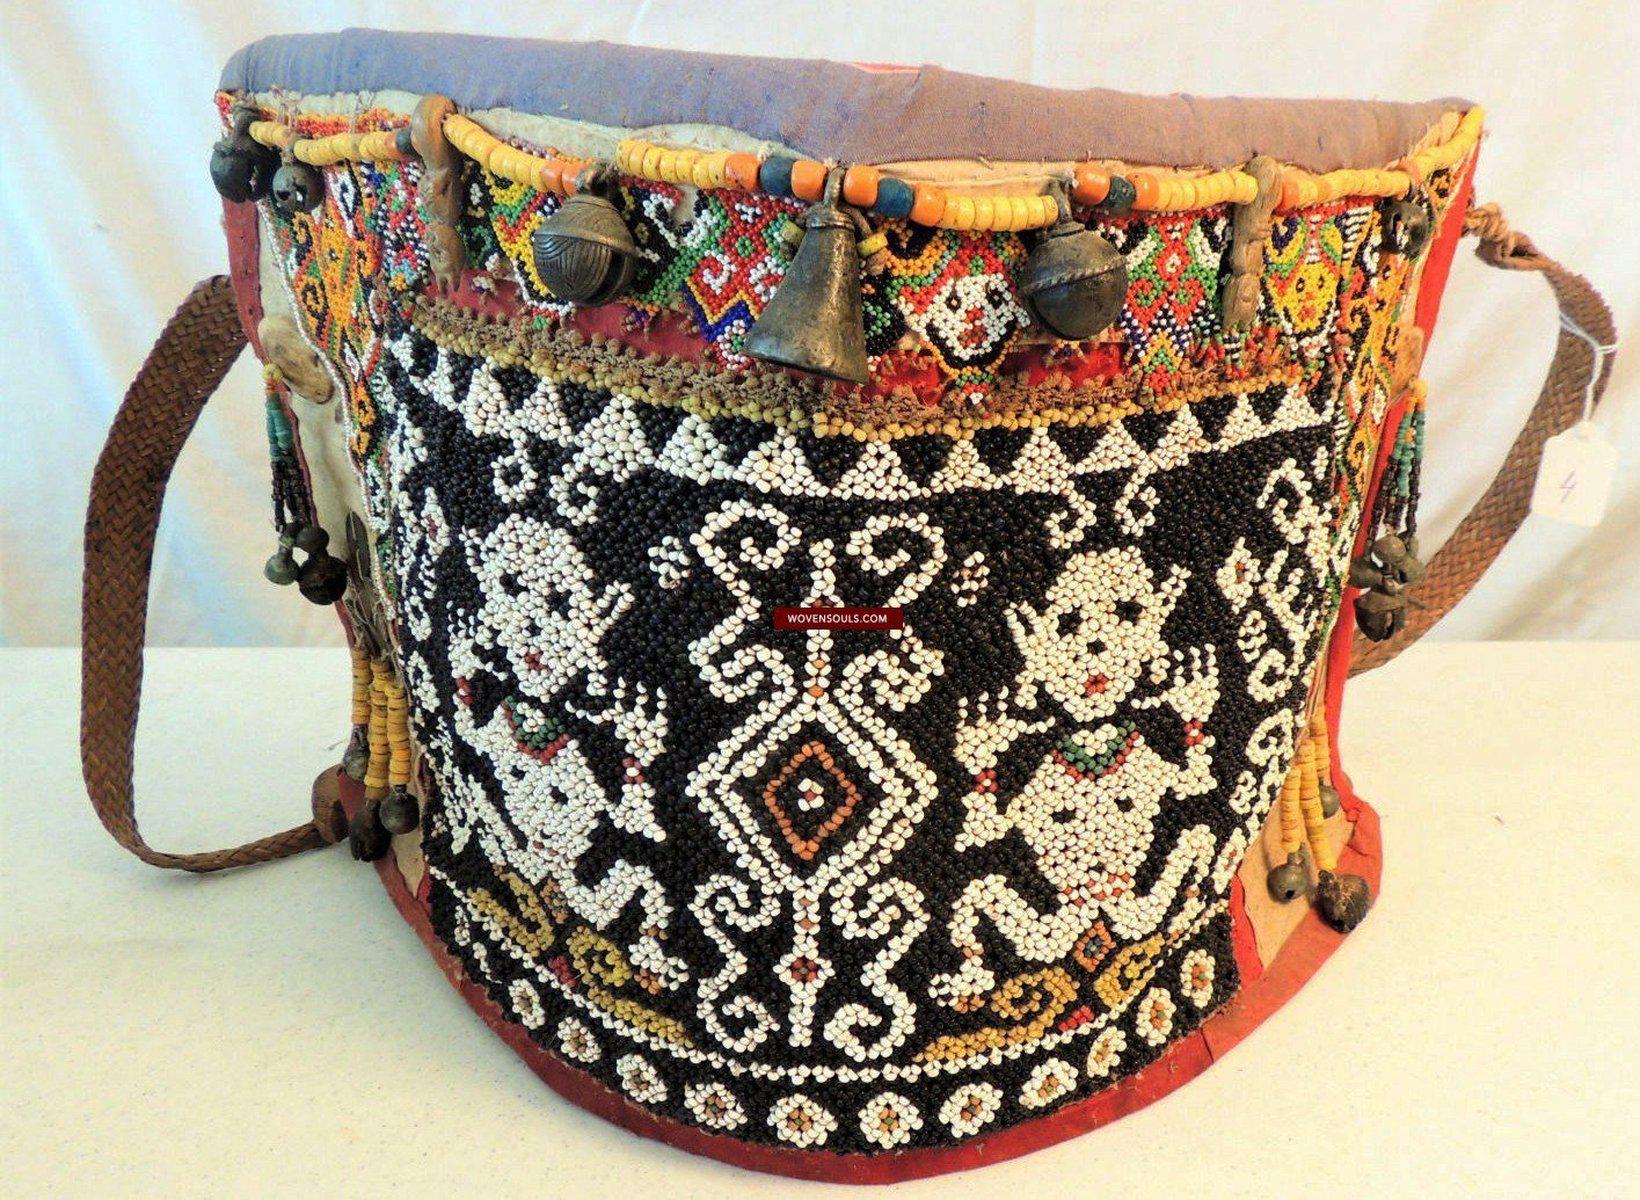 986 Old Beaded Dayak Baby Carrier from Borneo